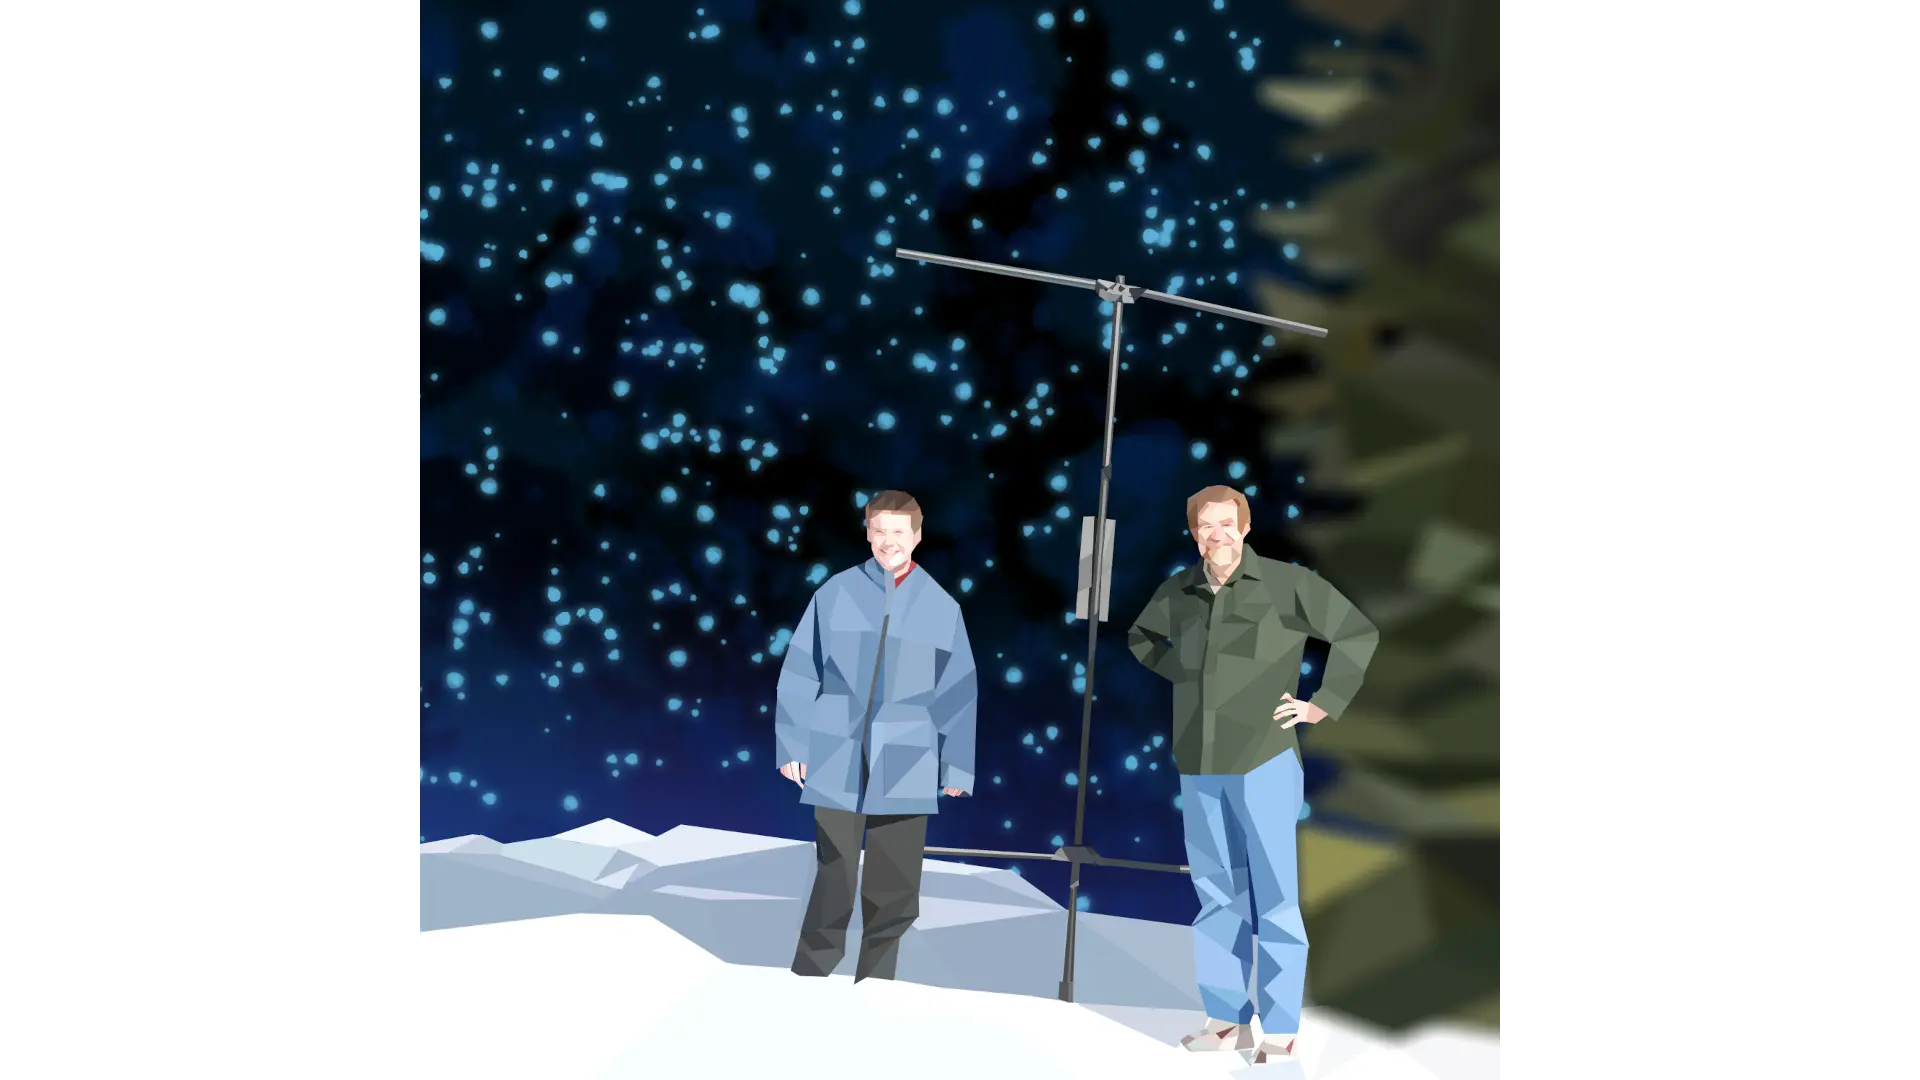 Digital art of a father and son, standing next to a radio antenna.